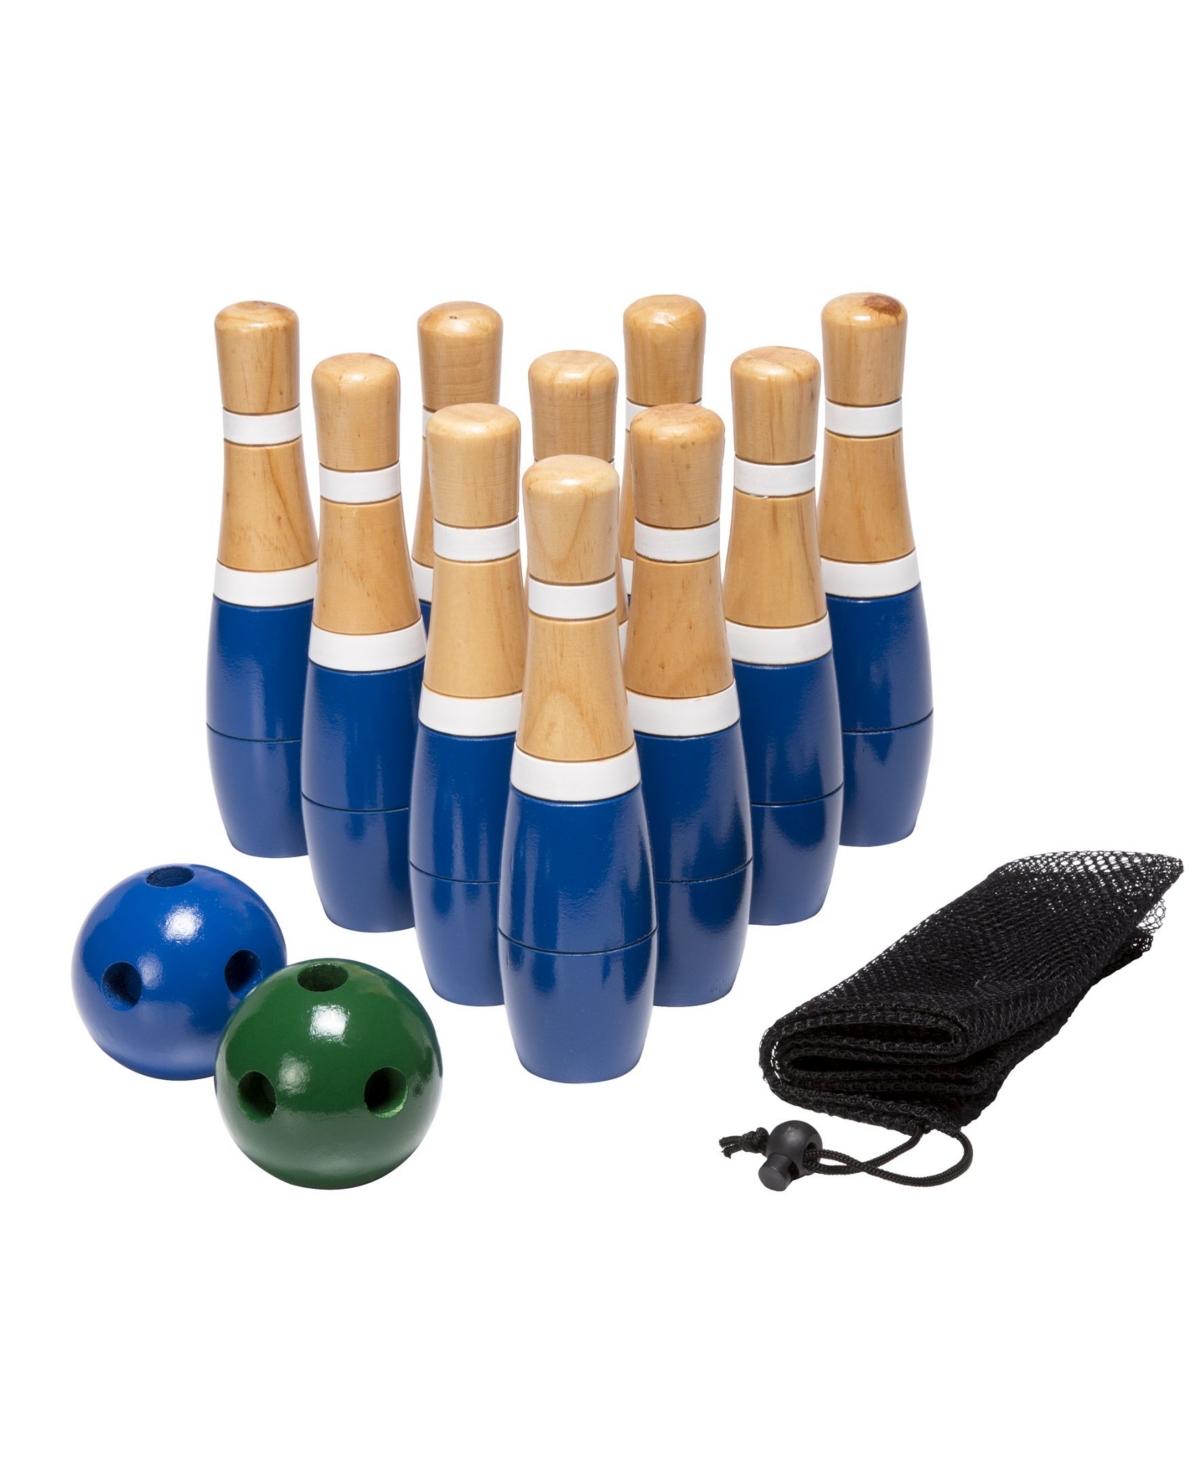 Shop Trademark Global Hey Play 8 Inch Wooden Lawn Bowling Set In Blue